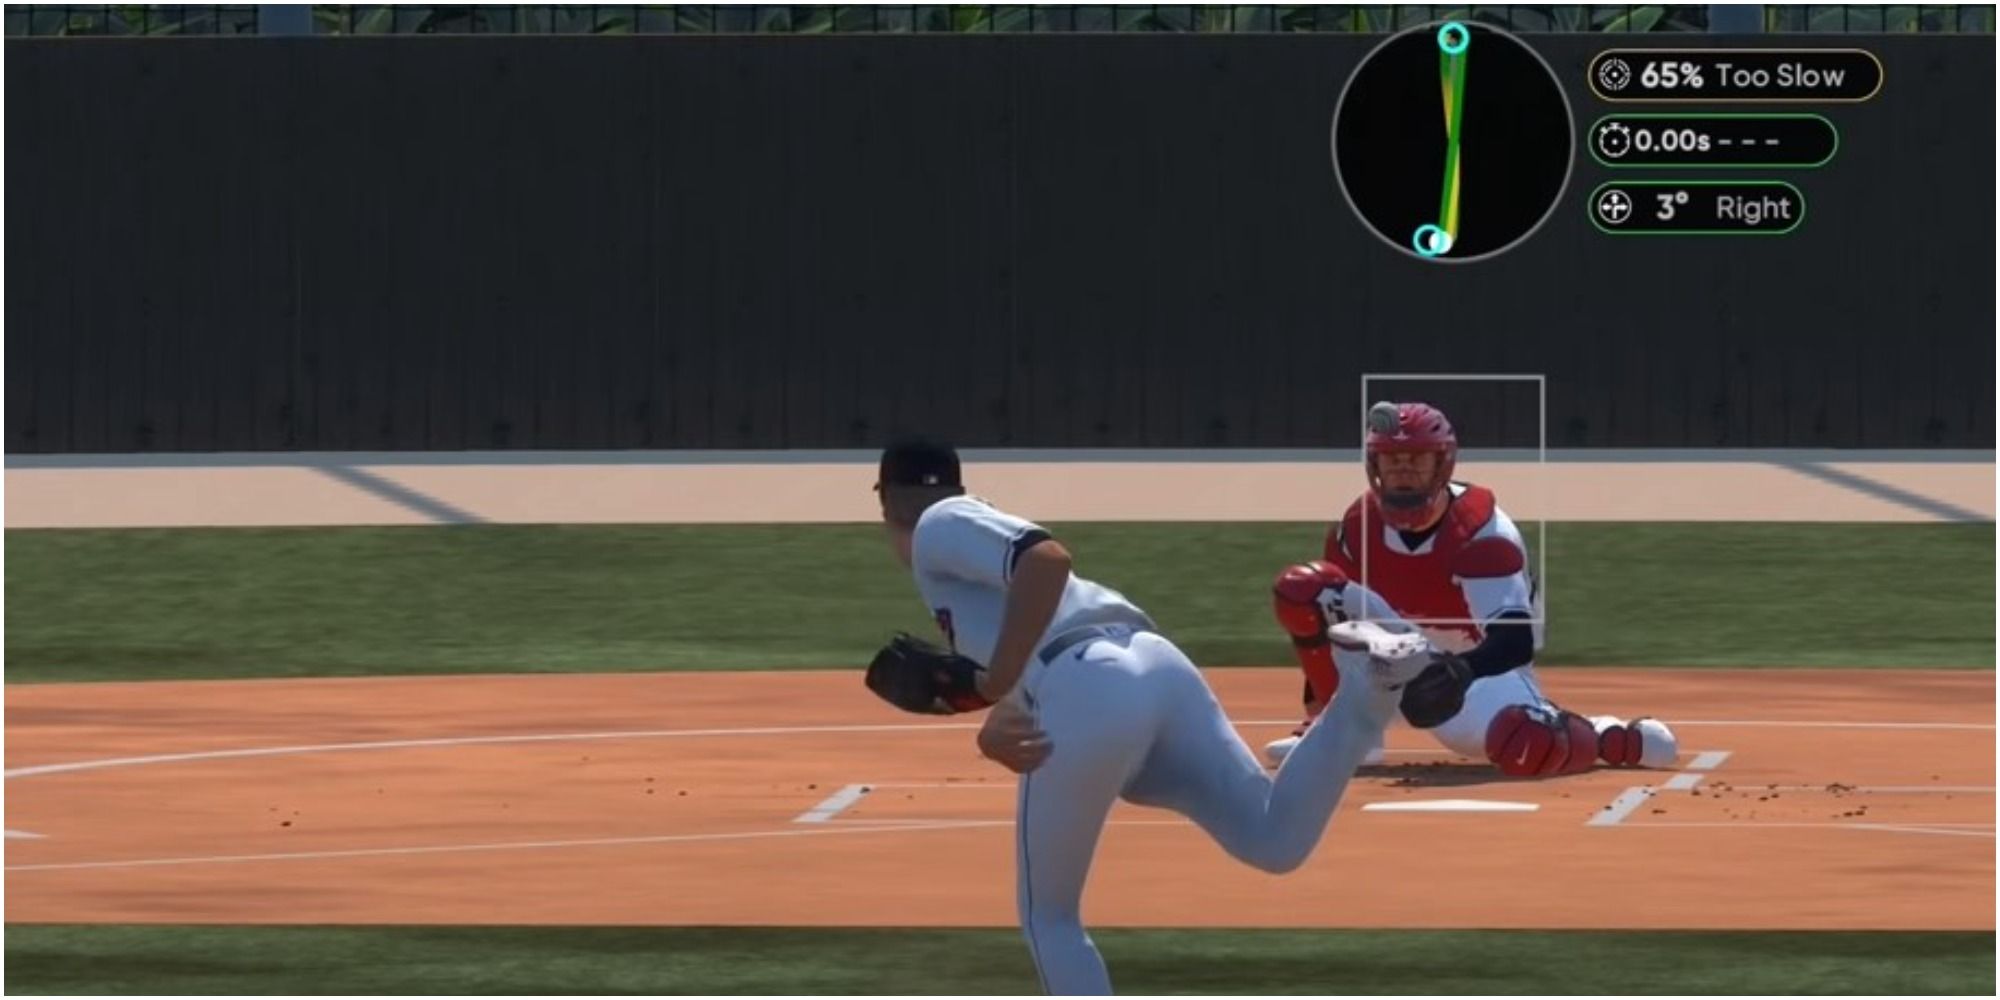 MLB The Show 22 Pinpoint Pitching With A Fastball